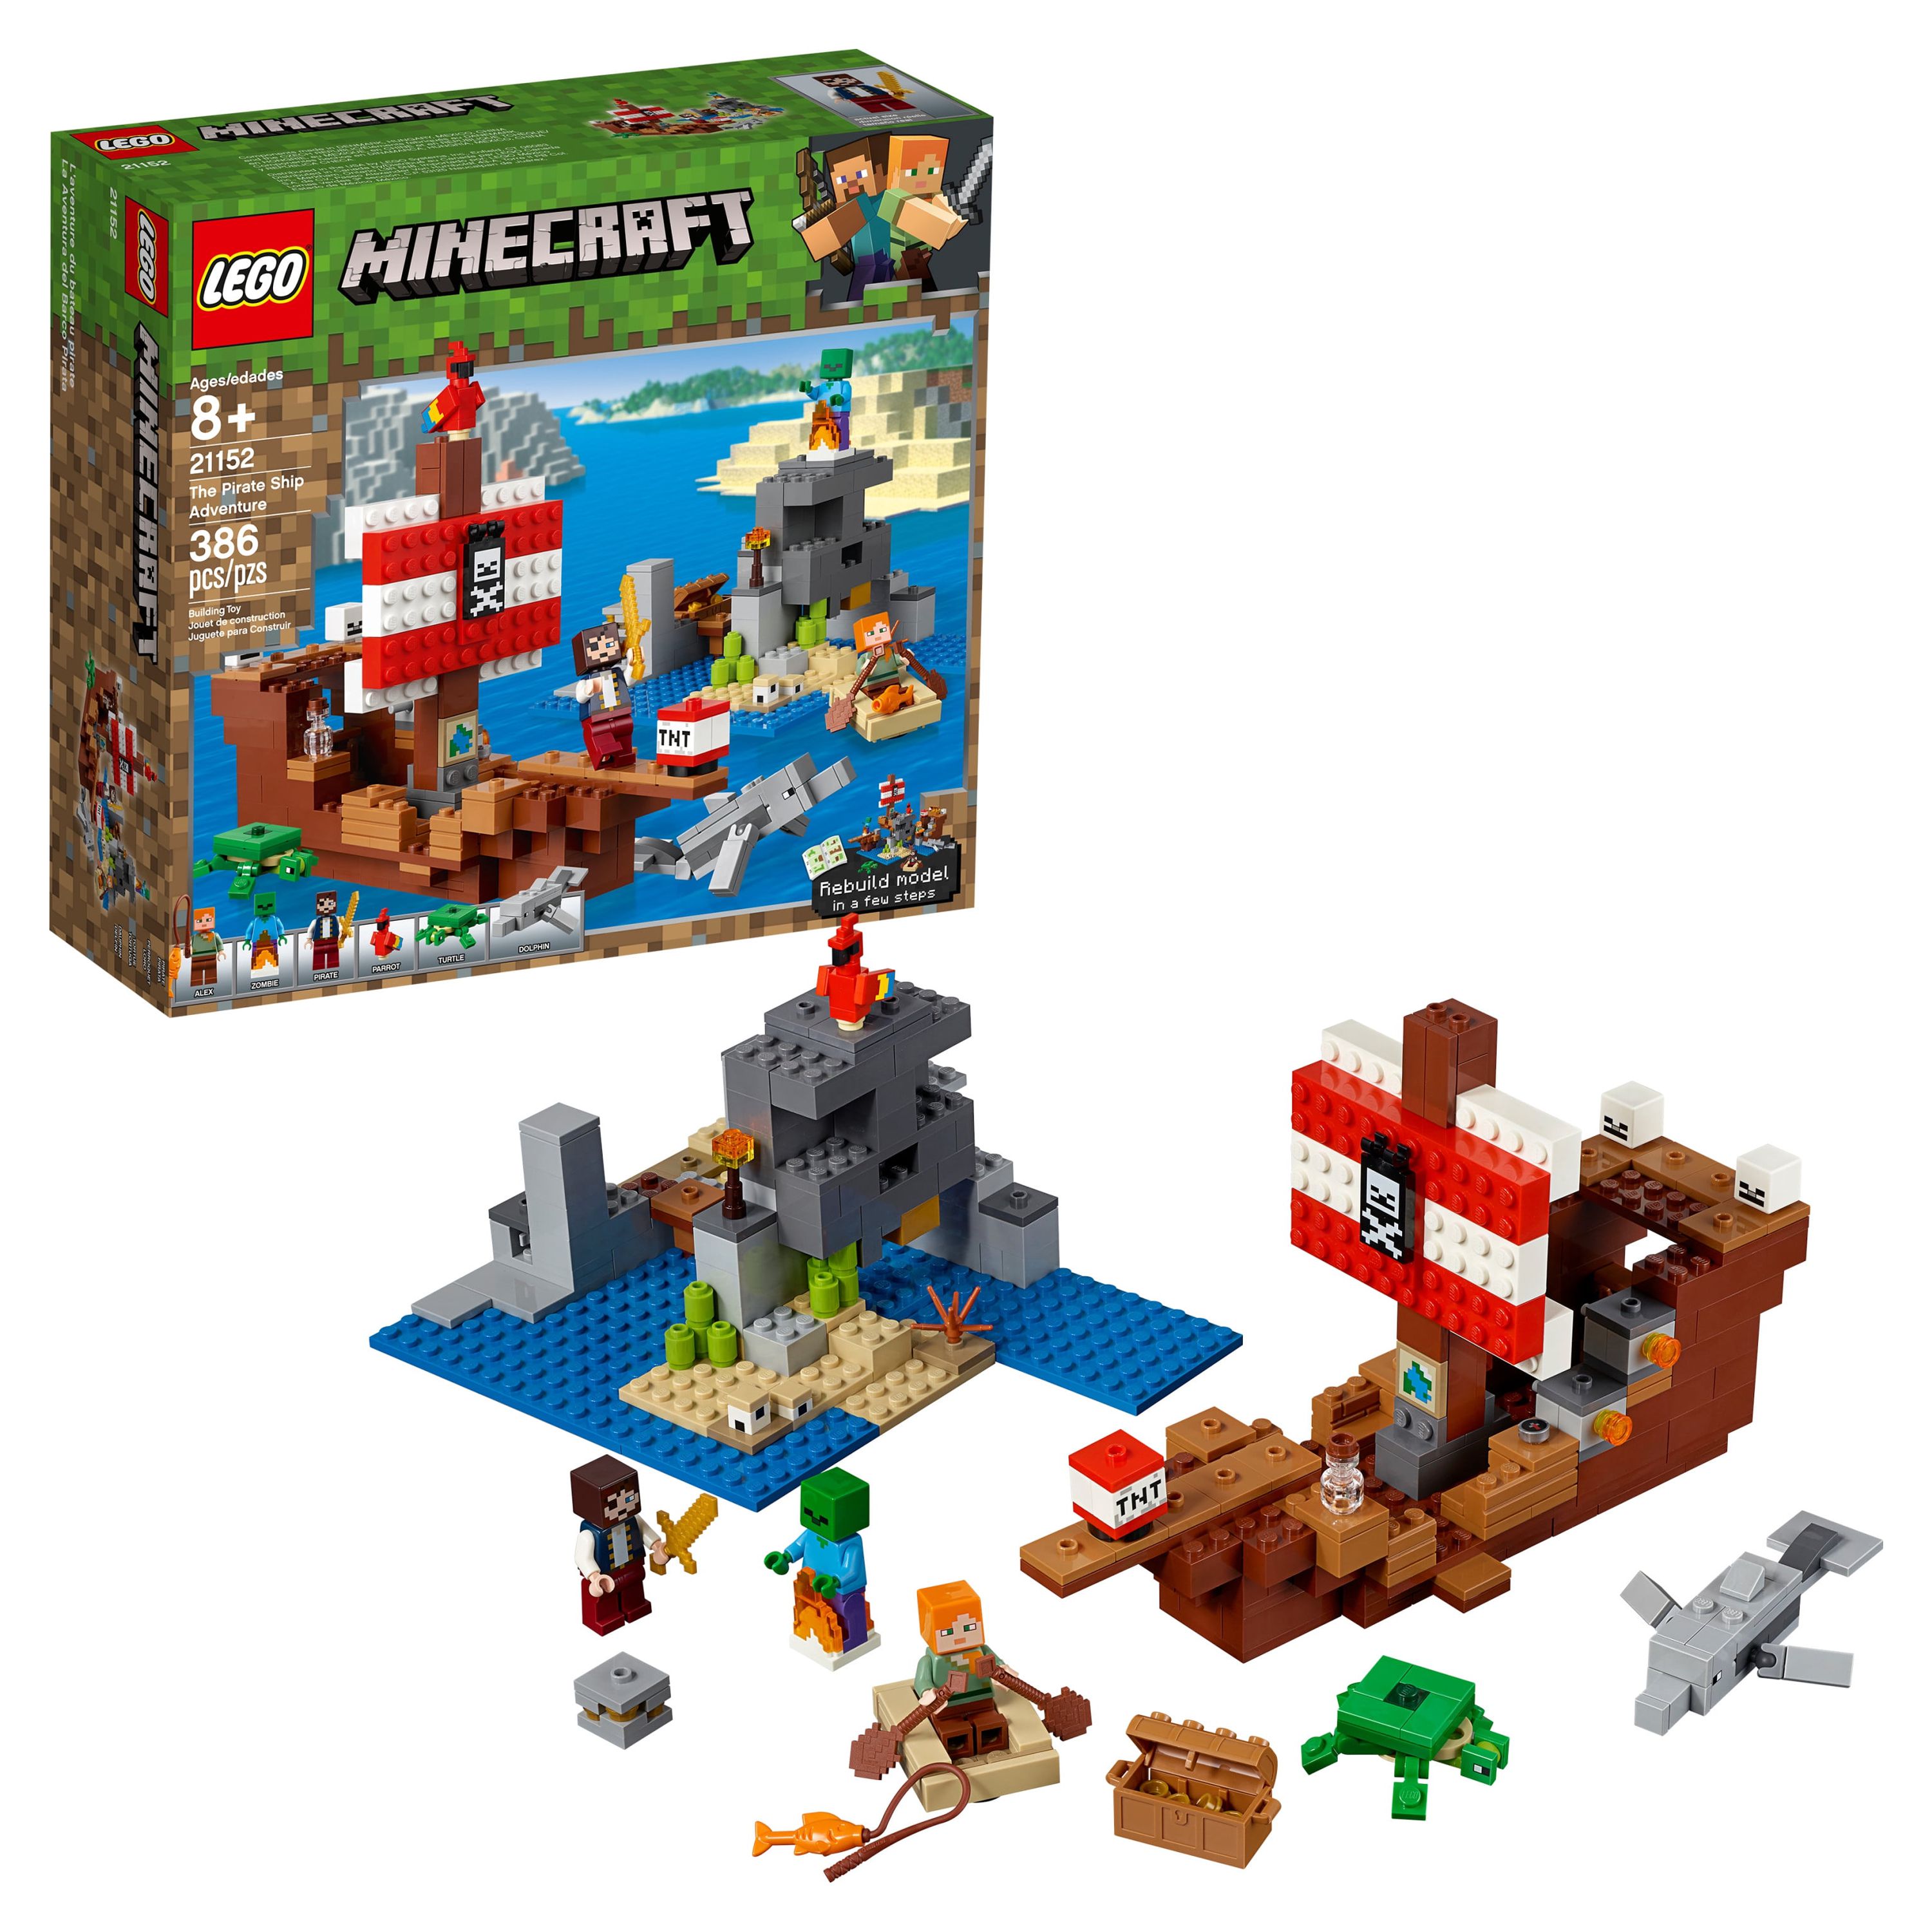 LEGO Minecraft The Pirate Ship Adventure 21152 Pirate Ship Boat Shark Treasure Chest Building Toy Kit (386 Pieces) - image 1 of 6